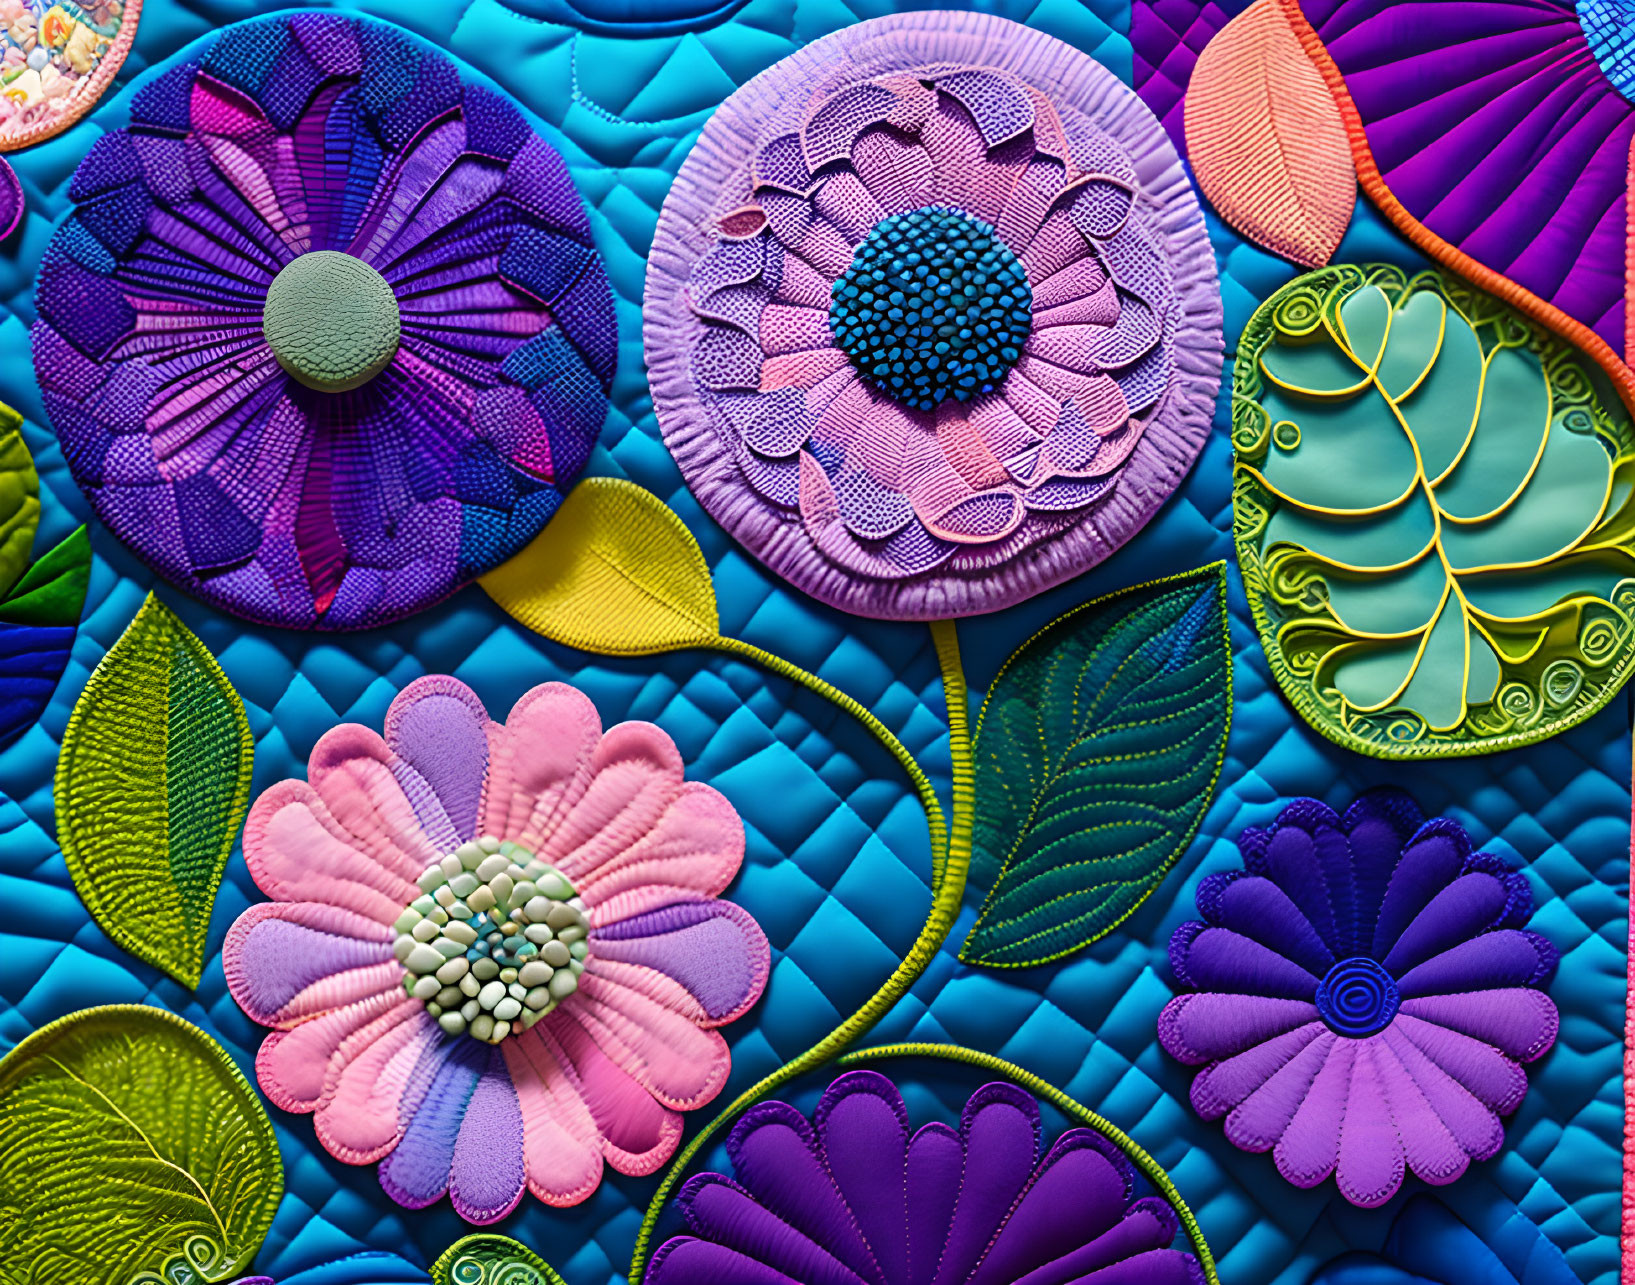 Vibrant floral and leaf artwork with intricate fabric or paper quilling.